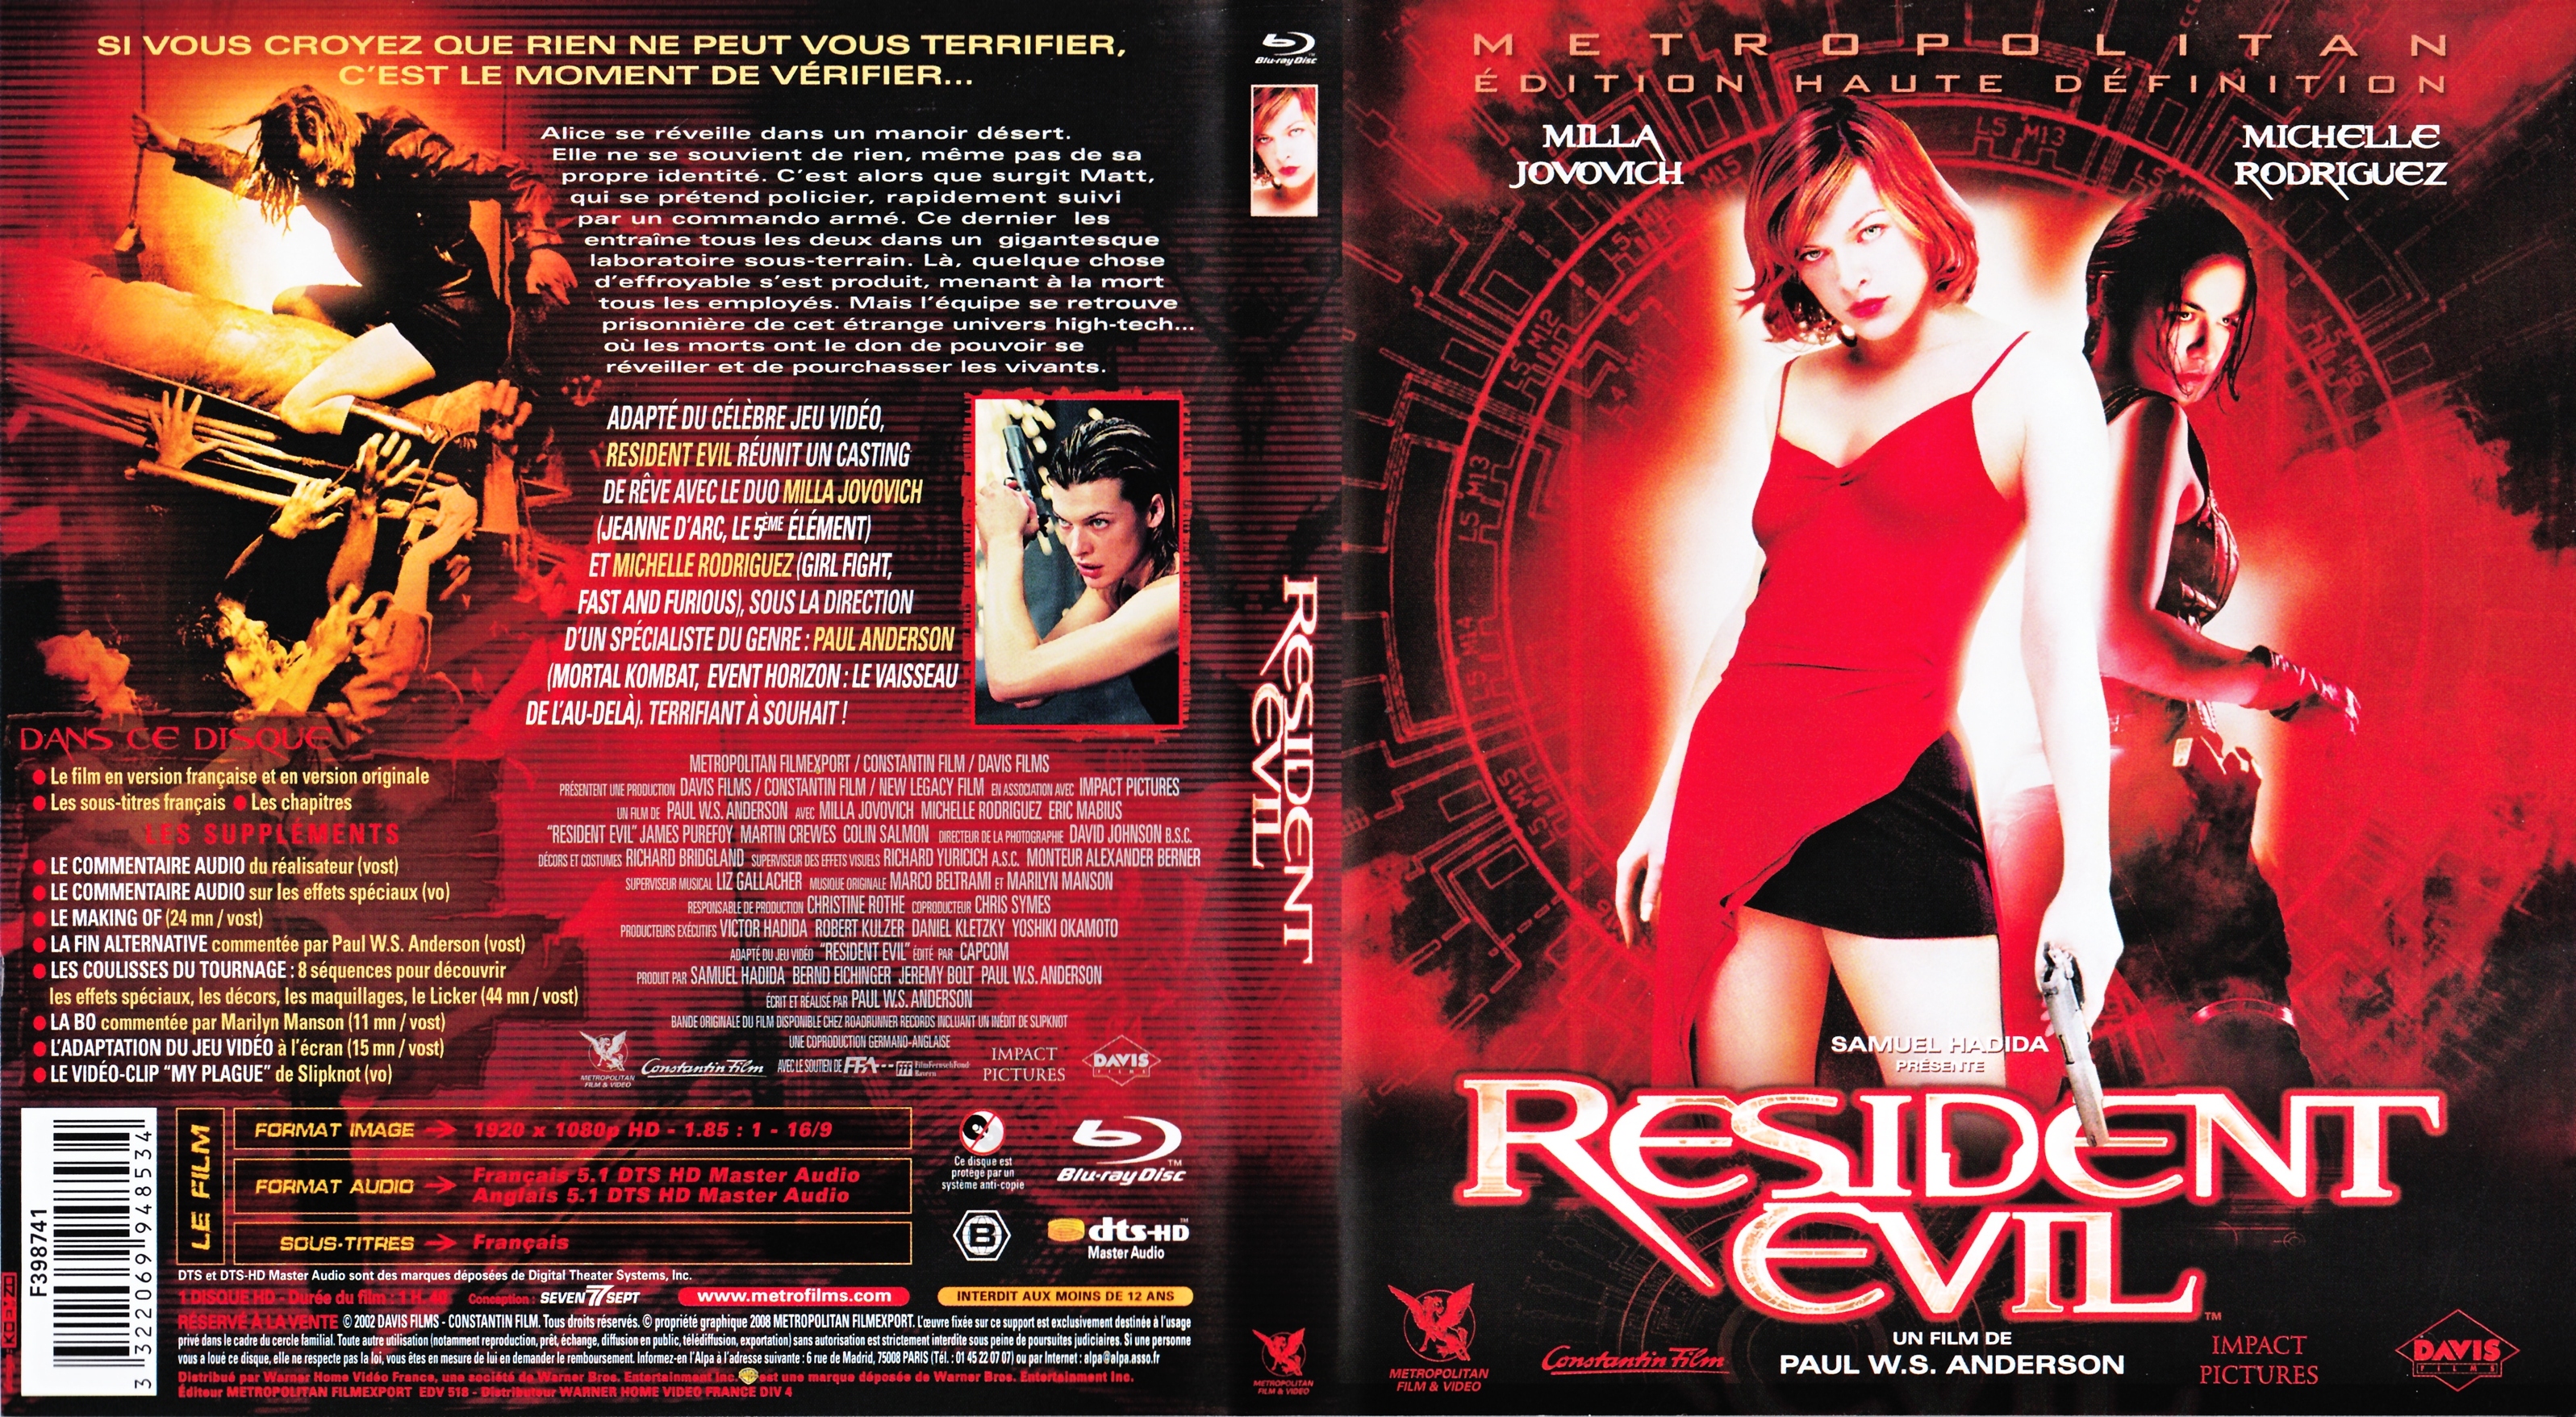 Jaquette DVD Resident Evil (BLU-RAY)